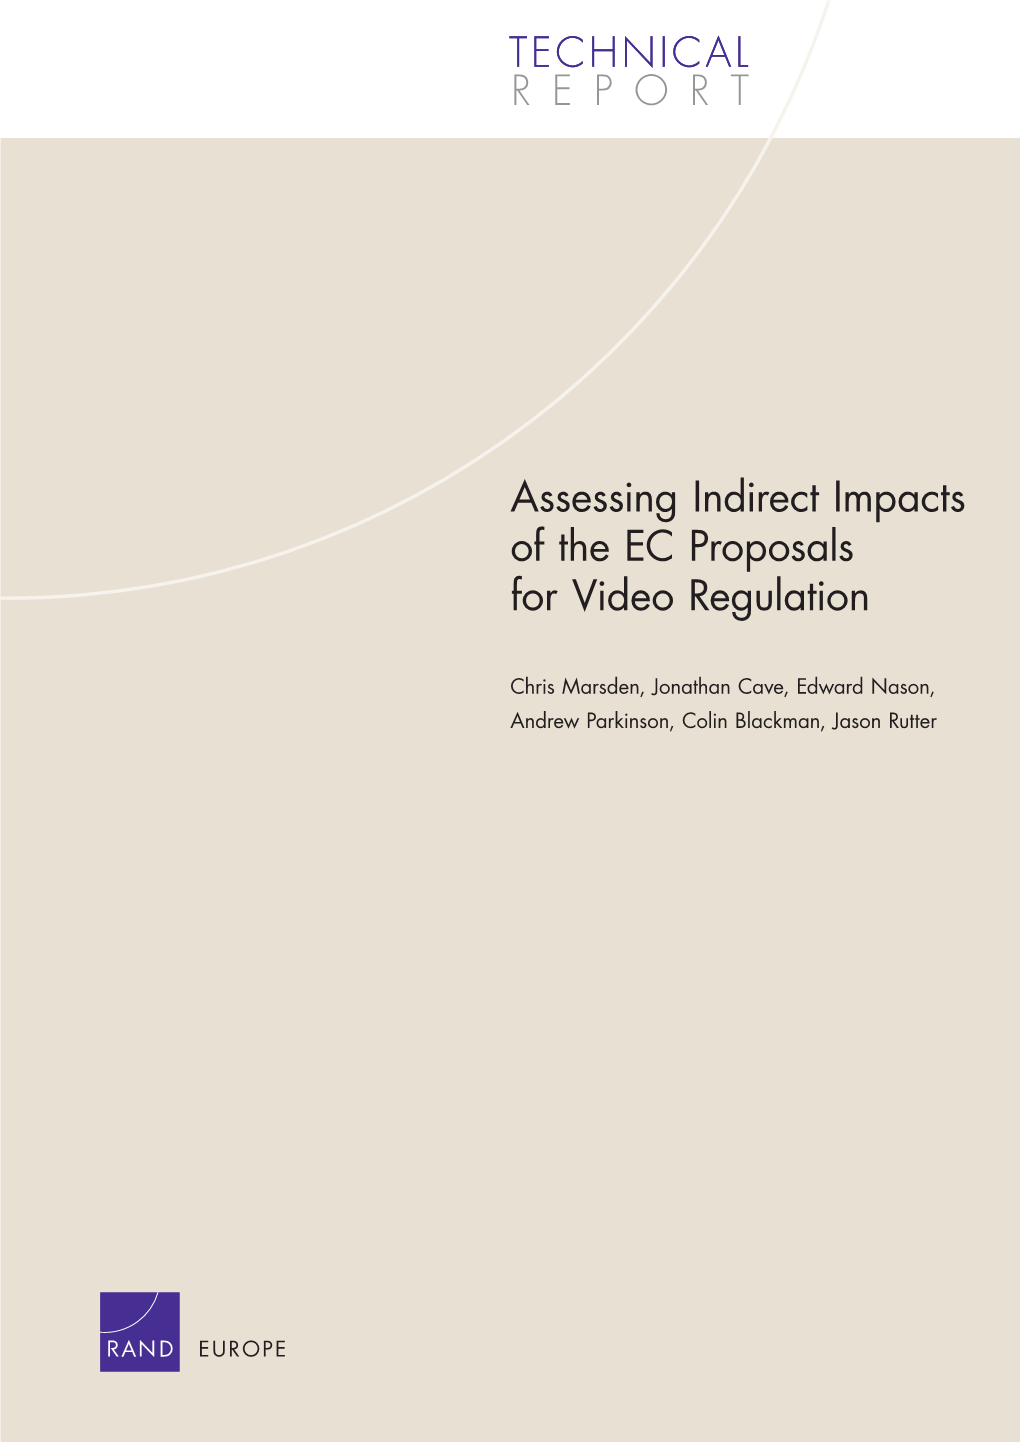 Assessing Indirect Impacts of the EC Proposals for Video Regulation